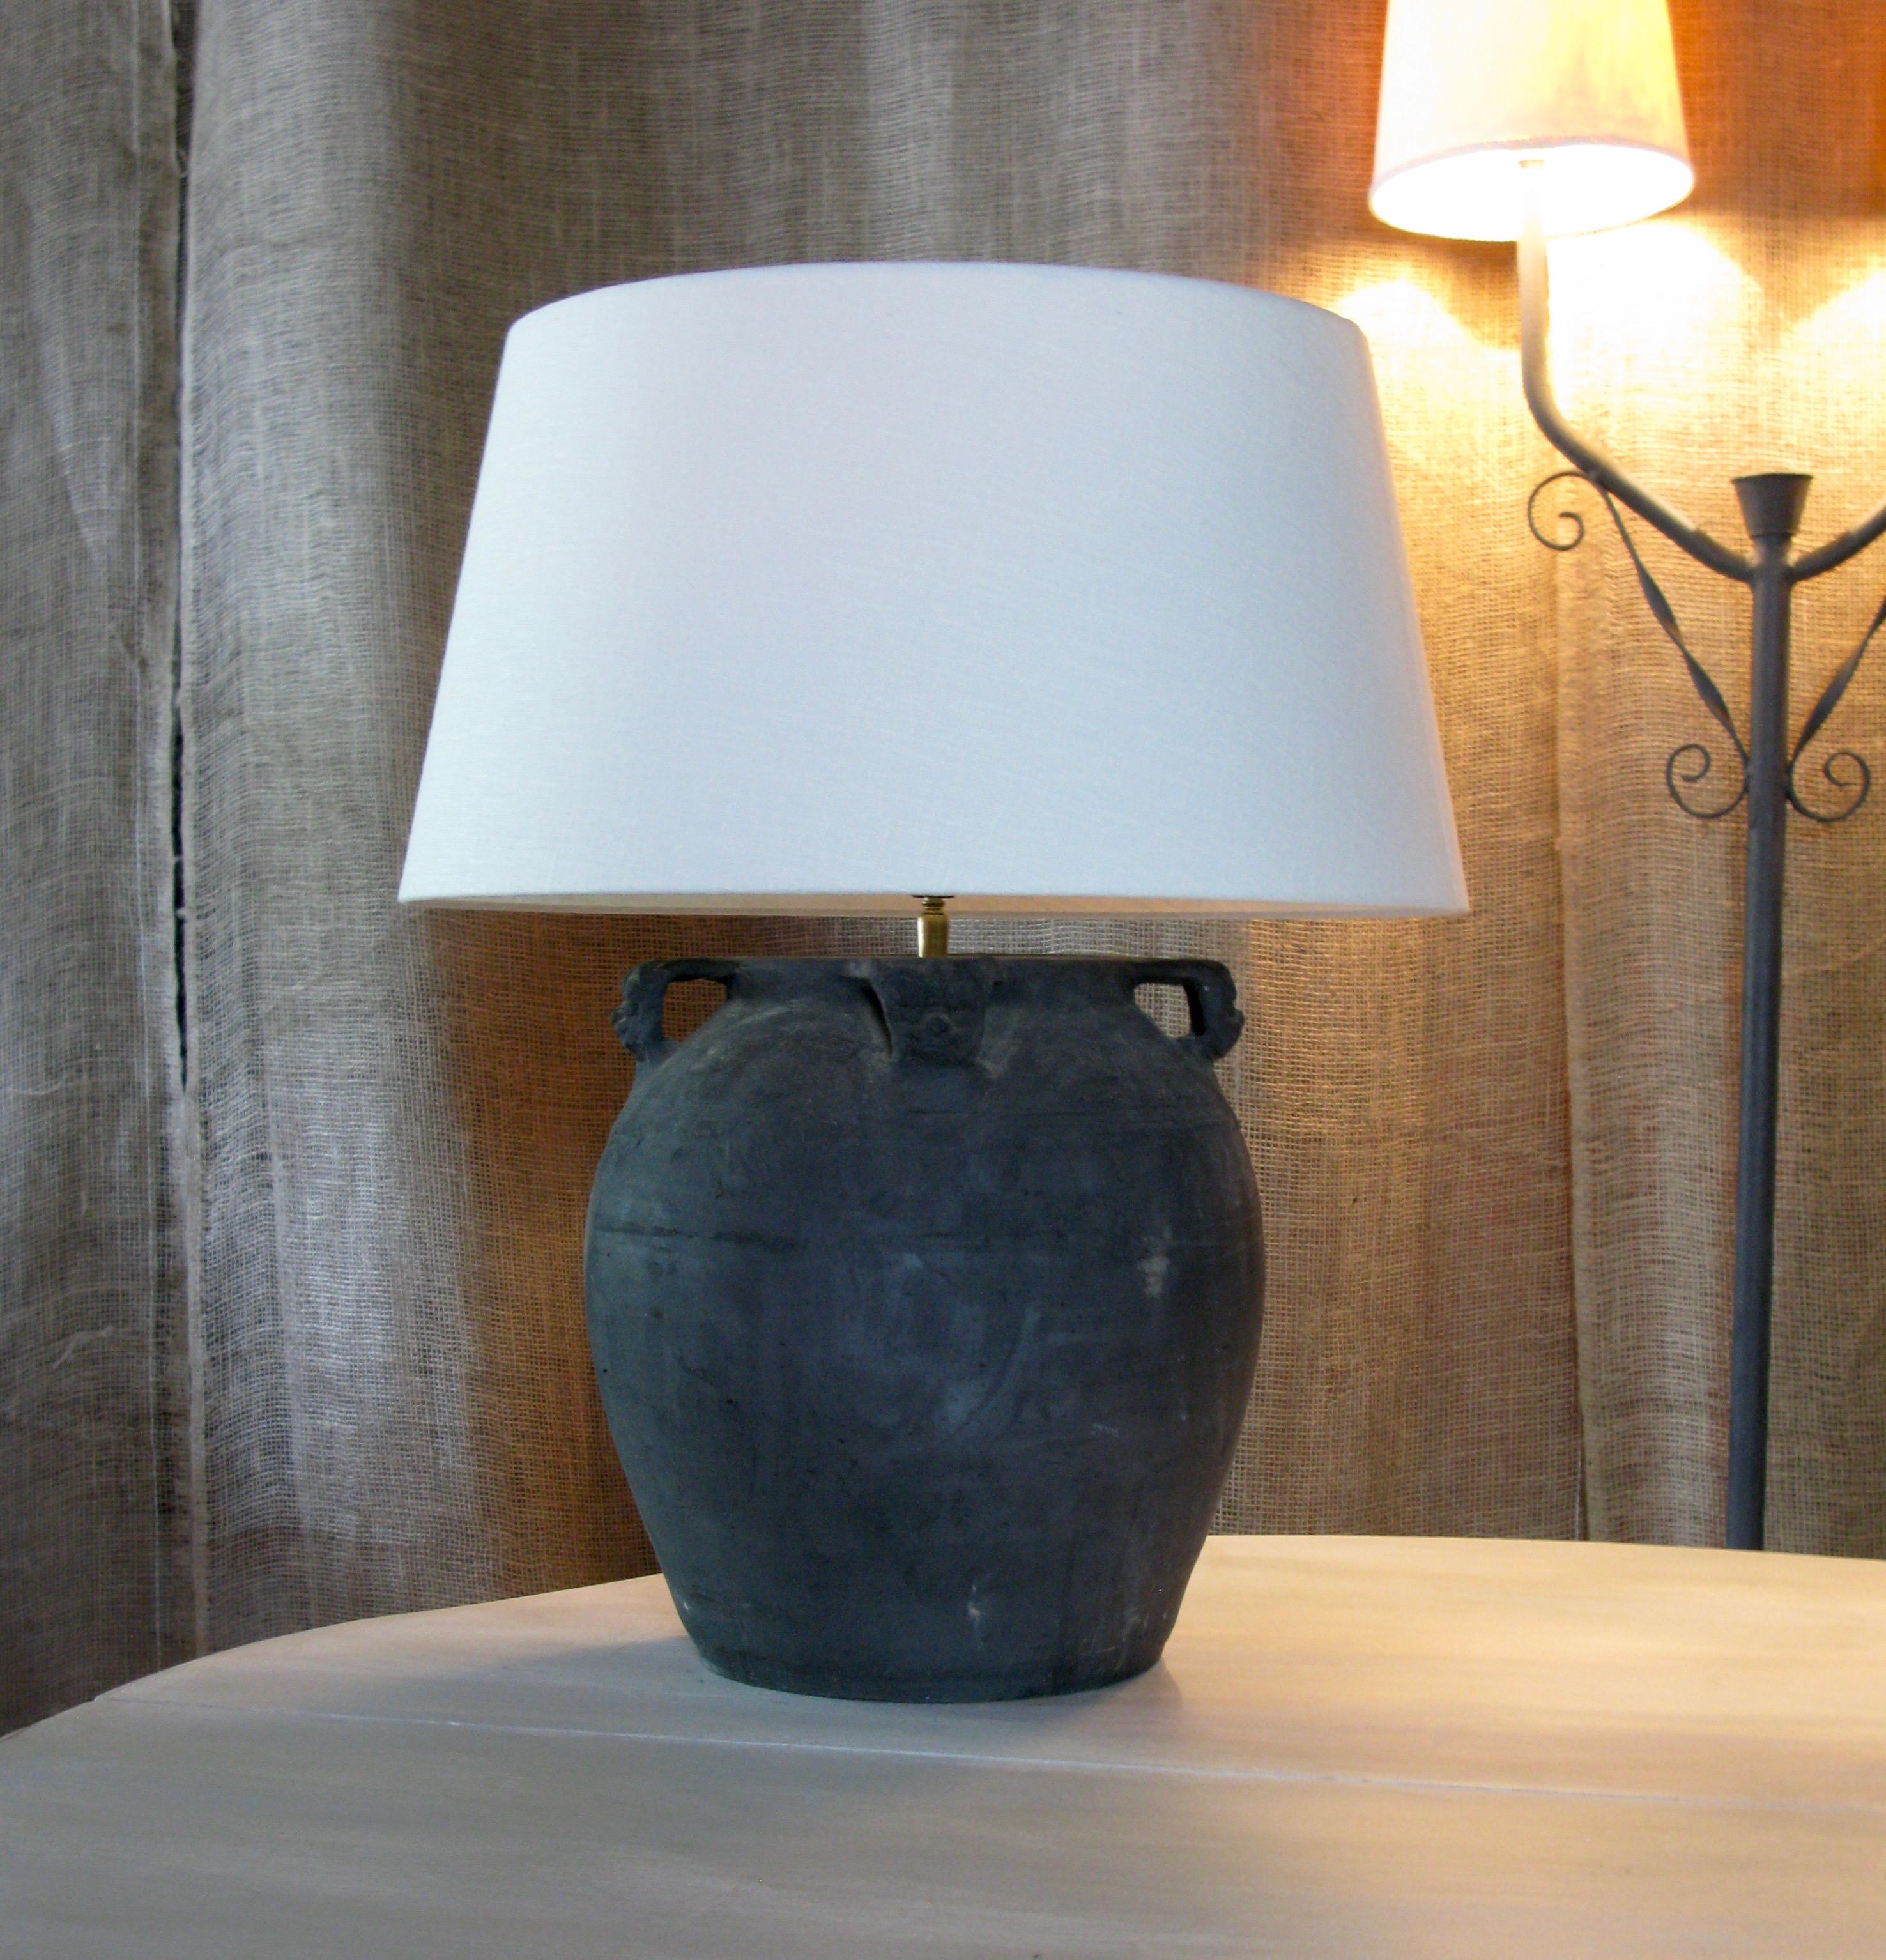 Chinese Old Clay Pot, lamp, lamp with linen shade